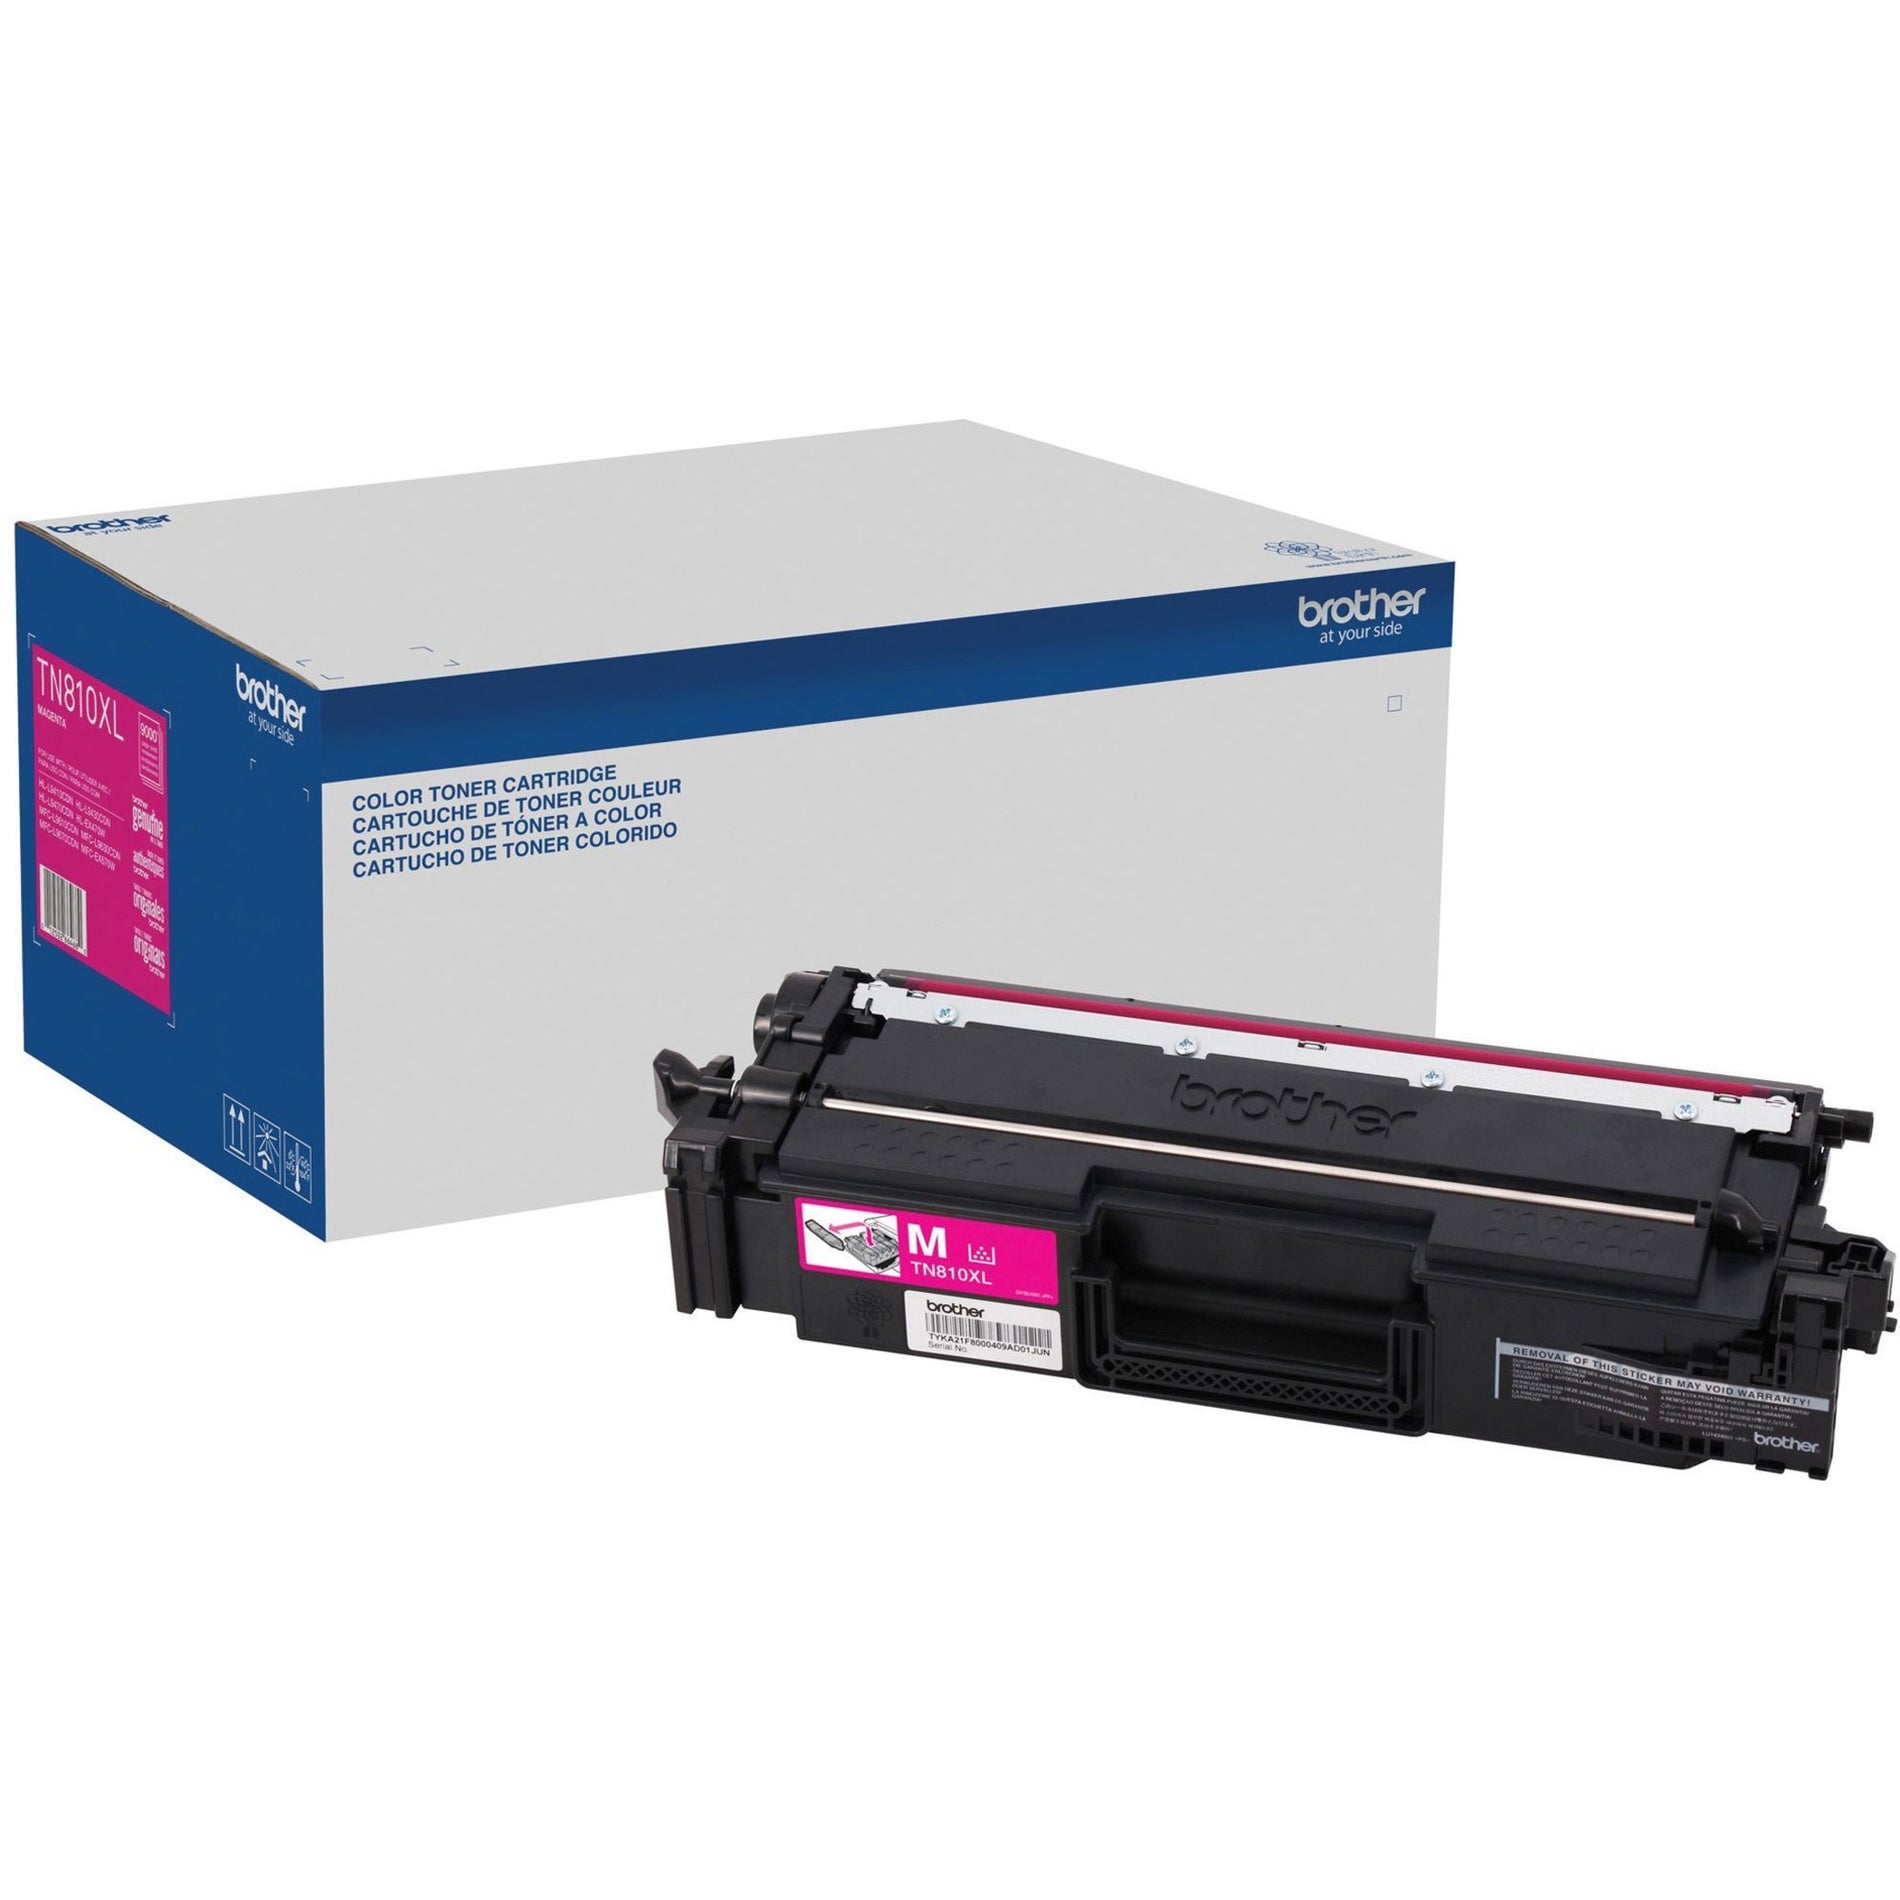 Brother TN810XLM High-Yield Magenta Toner Cartridge, Original, 9000 Pages